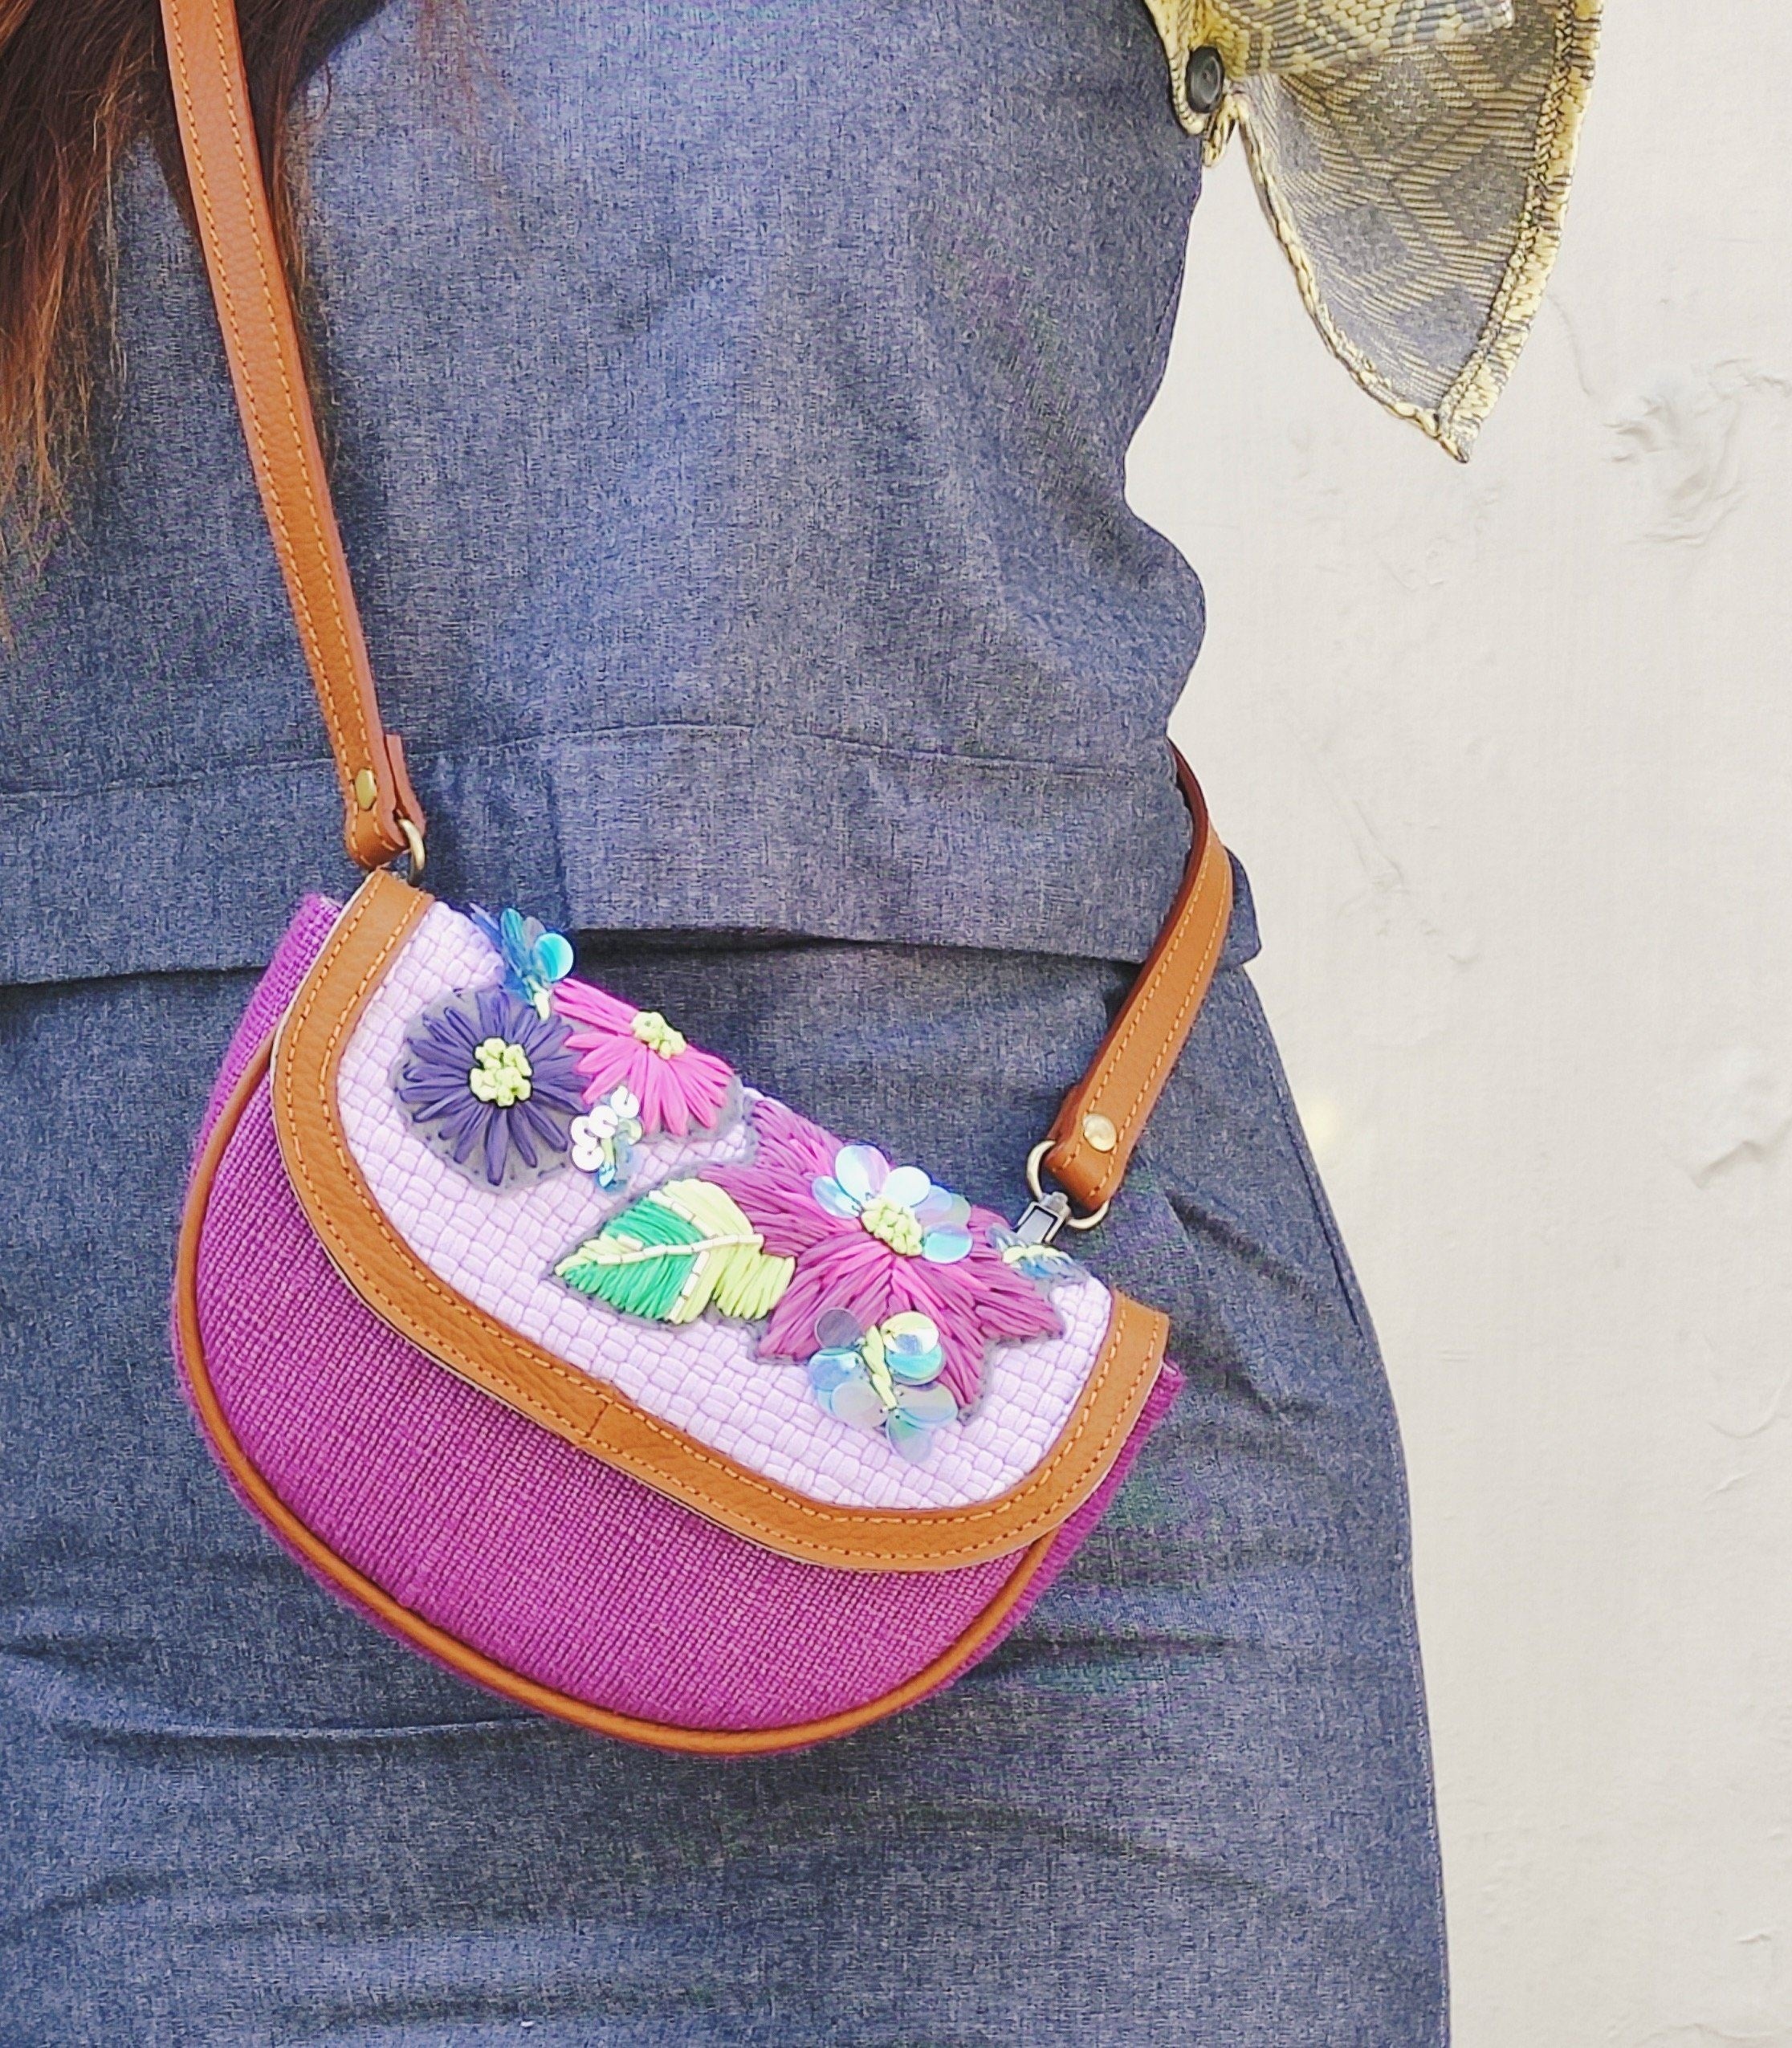 Vinia Hardin Fanny Pack in Ube - Rags2Riches